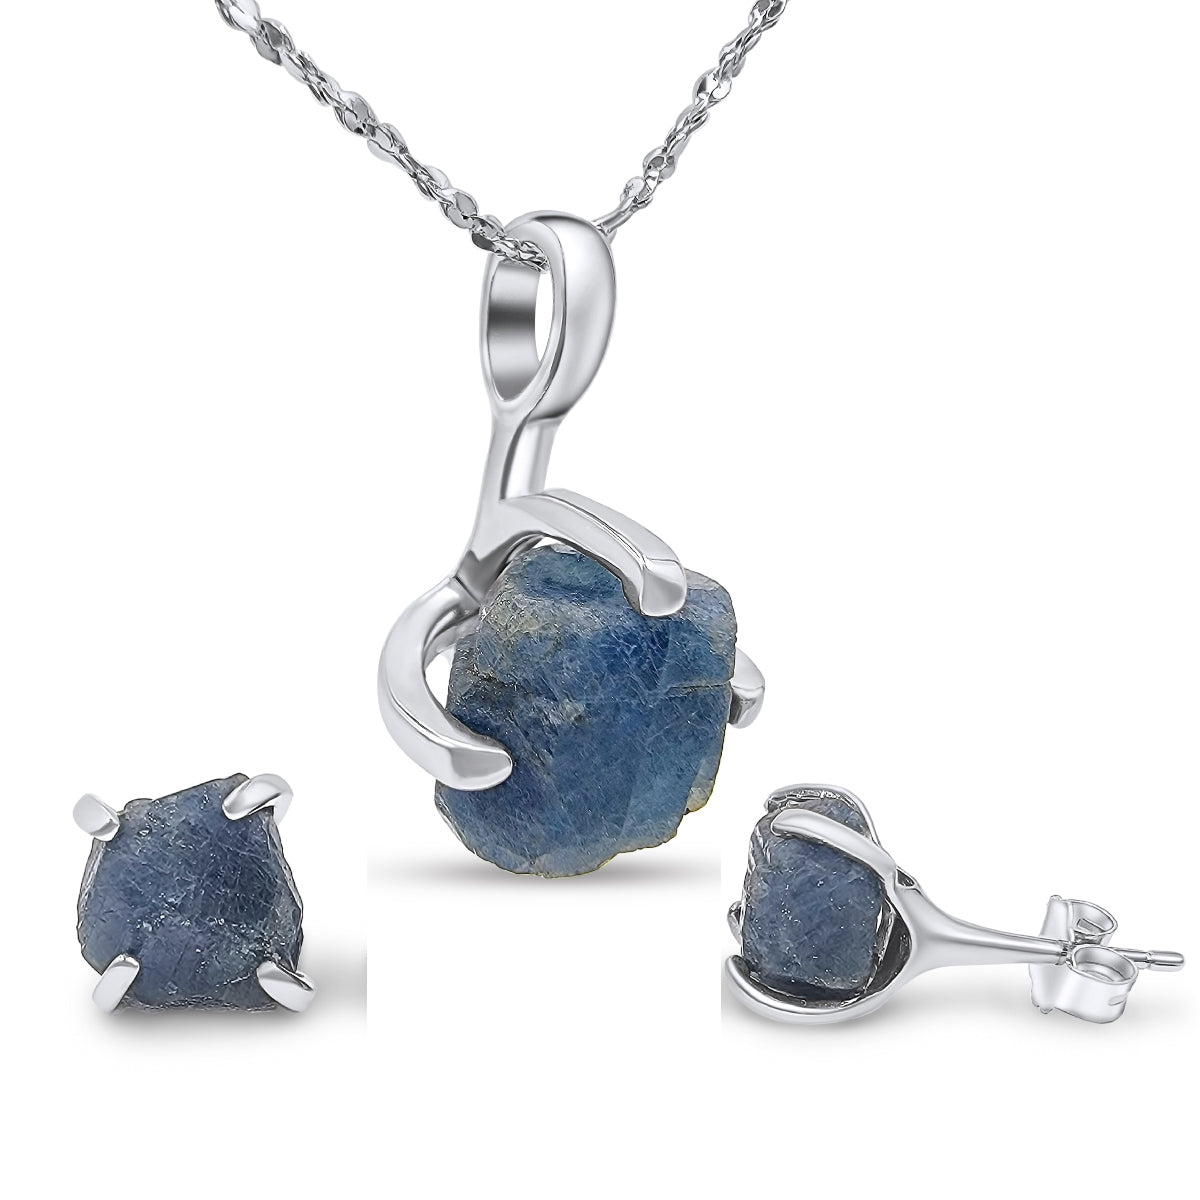 Raw Sapphire Necklace and Earrings Set - Uniquelan Jewelry